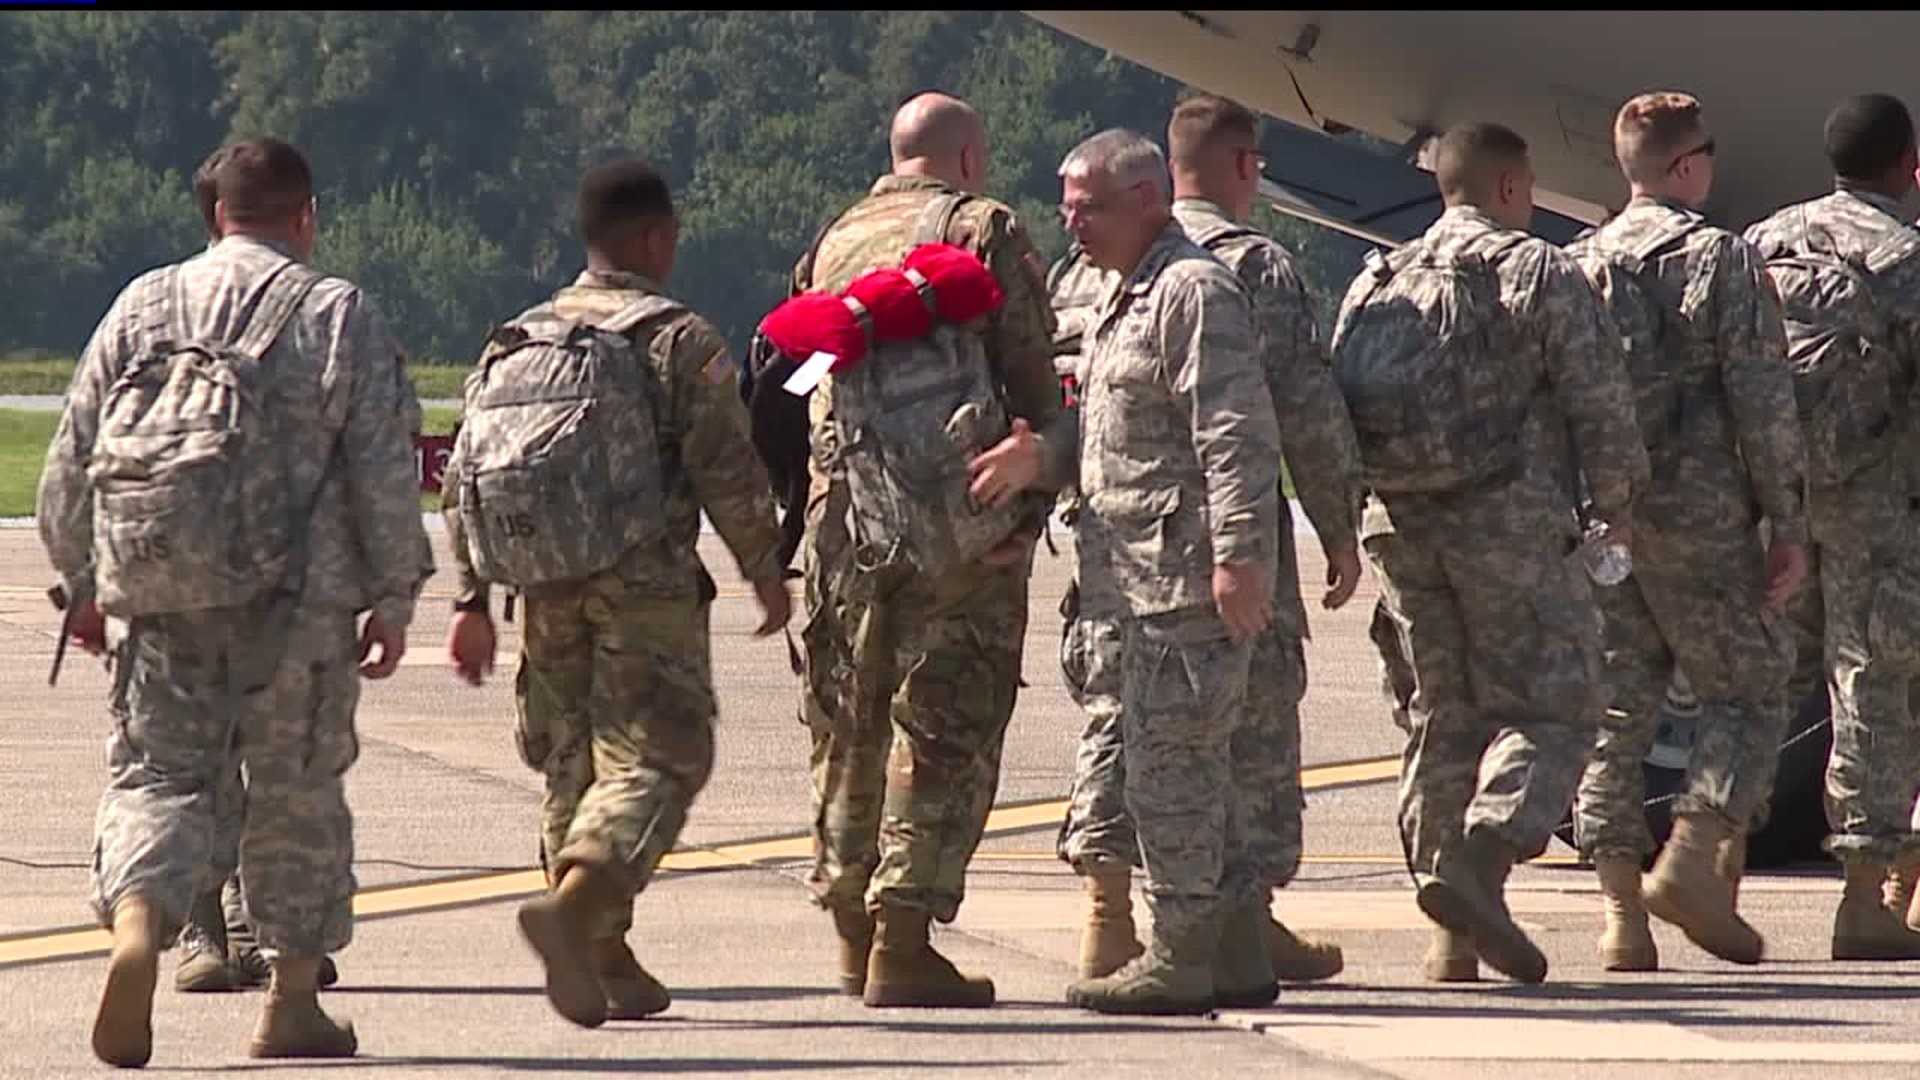 Gov. Wolf sends off Pa. National Guard members to help Harvey victims